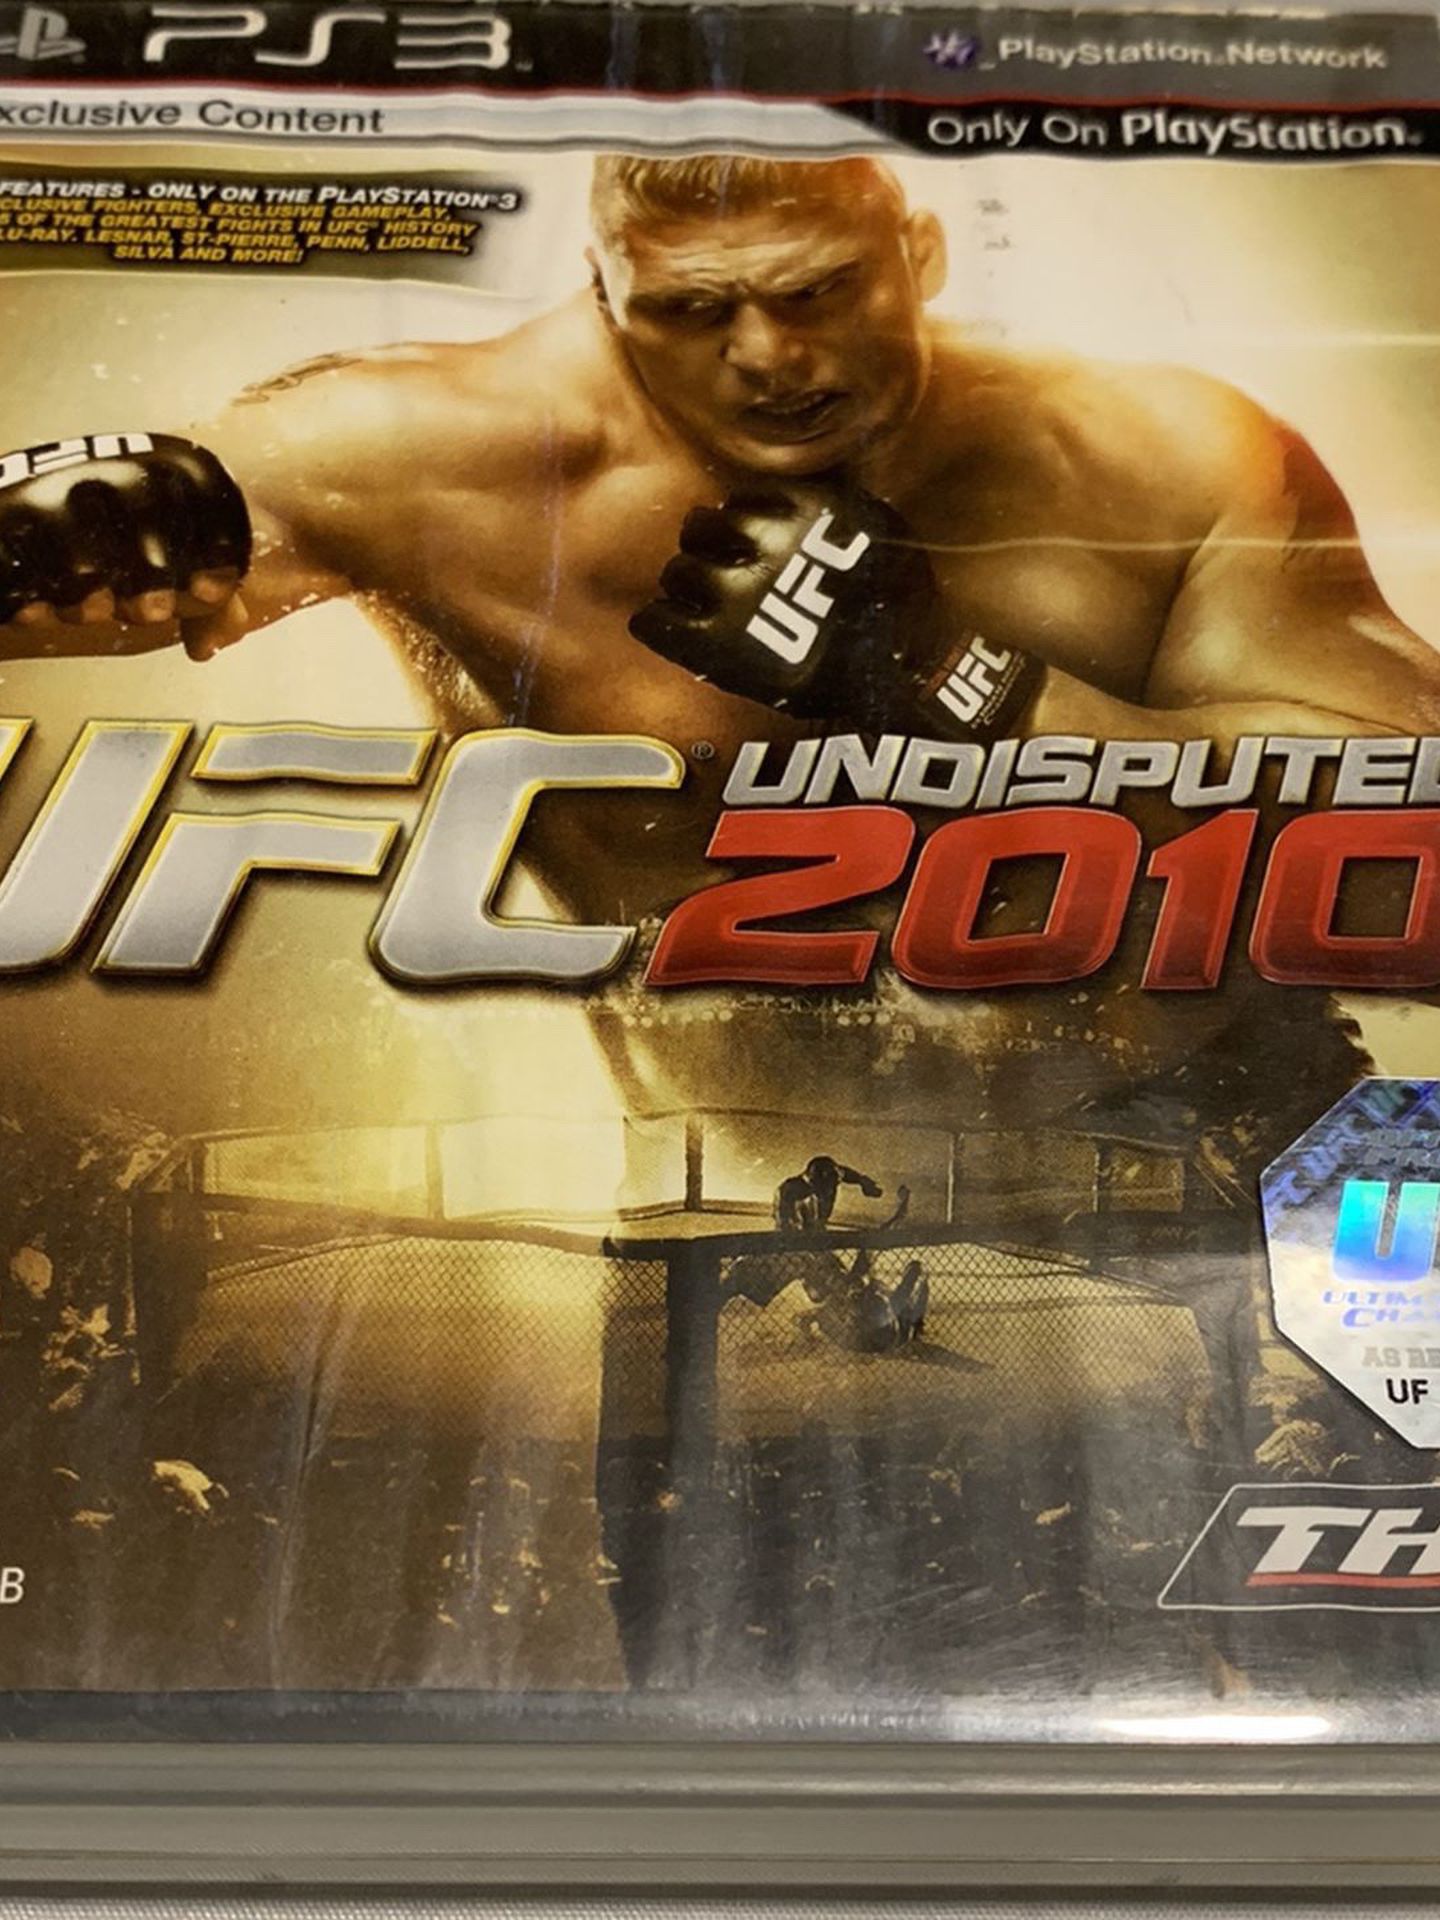 UFC Undisputed 2010 For PlayStation 3 PS3 Complete CIB Video Game